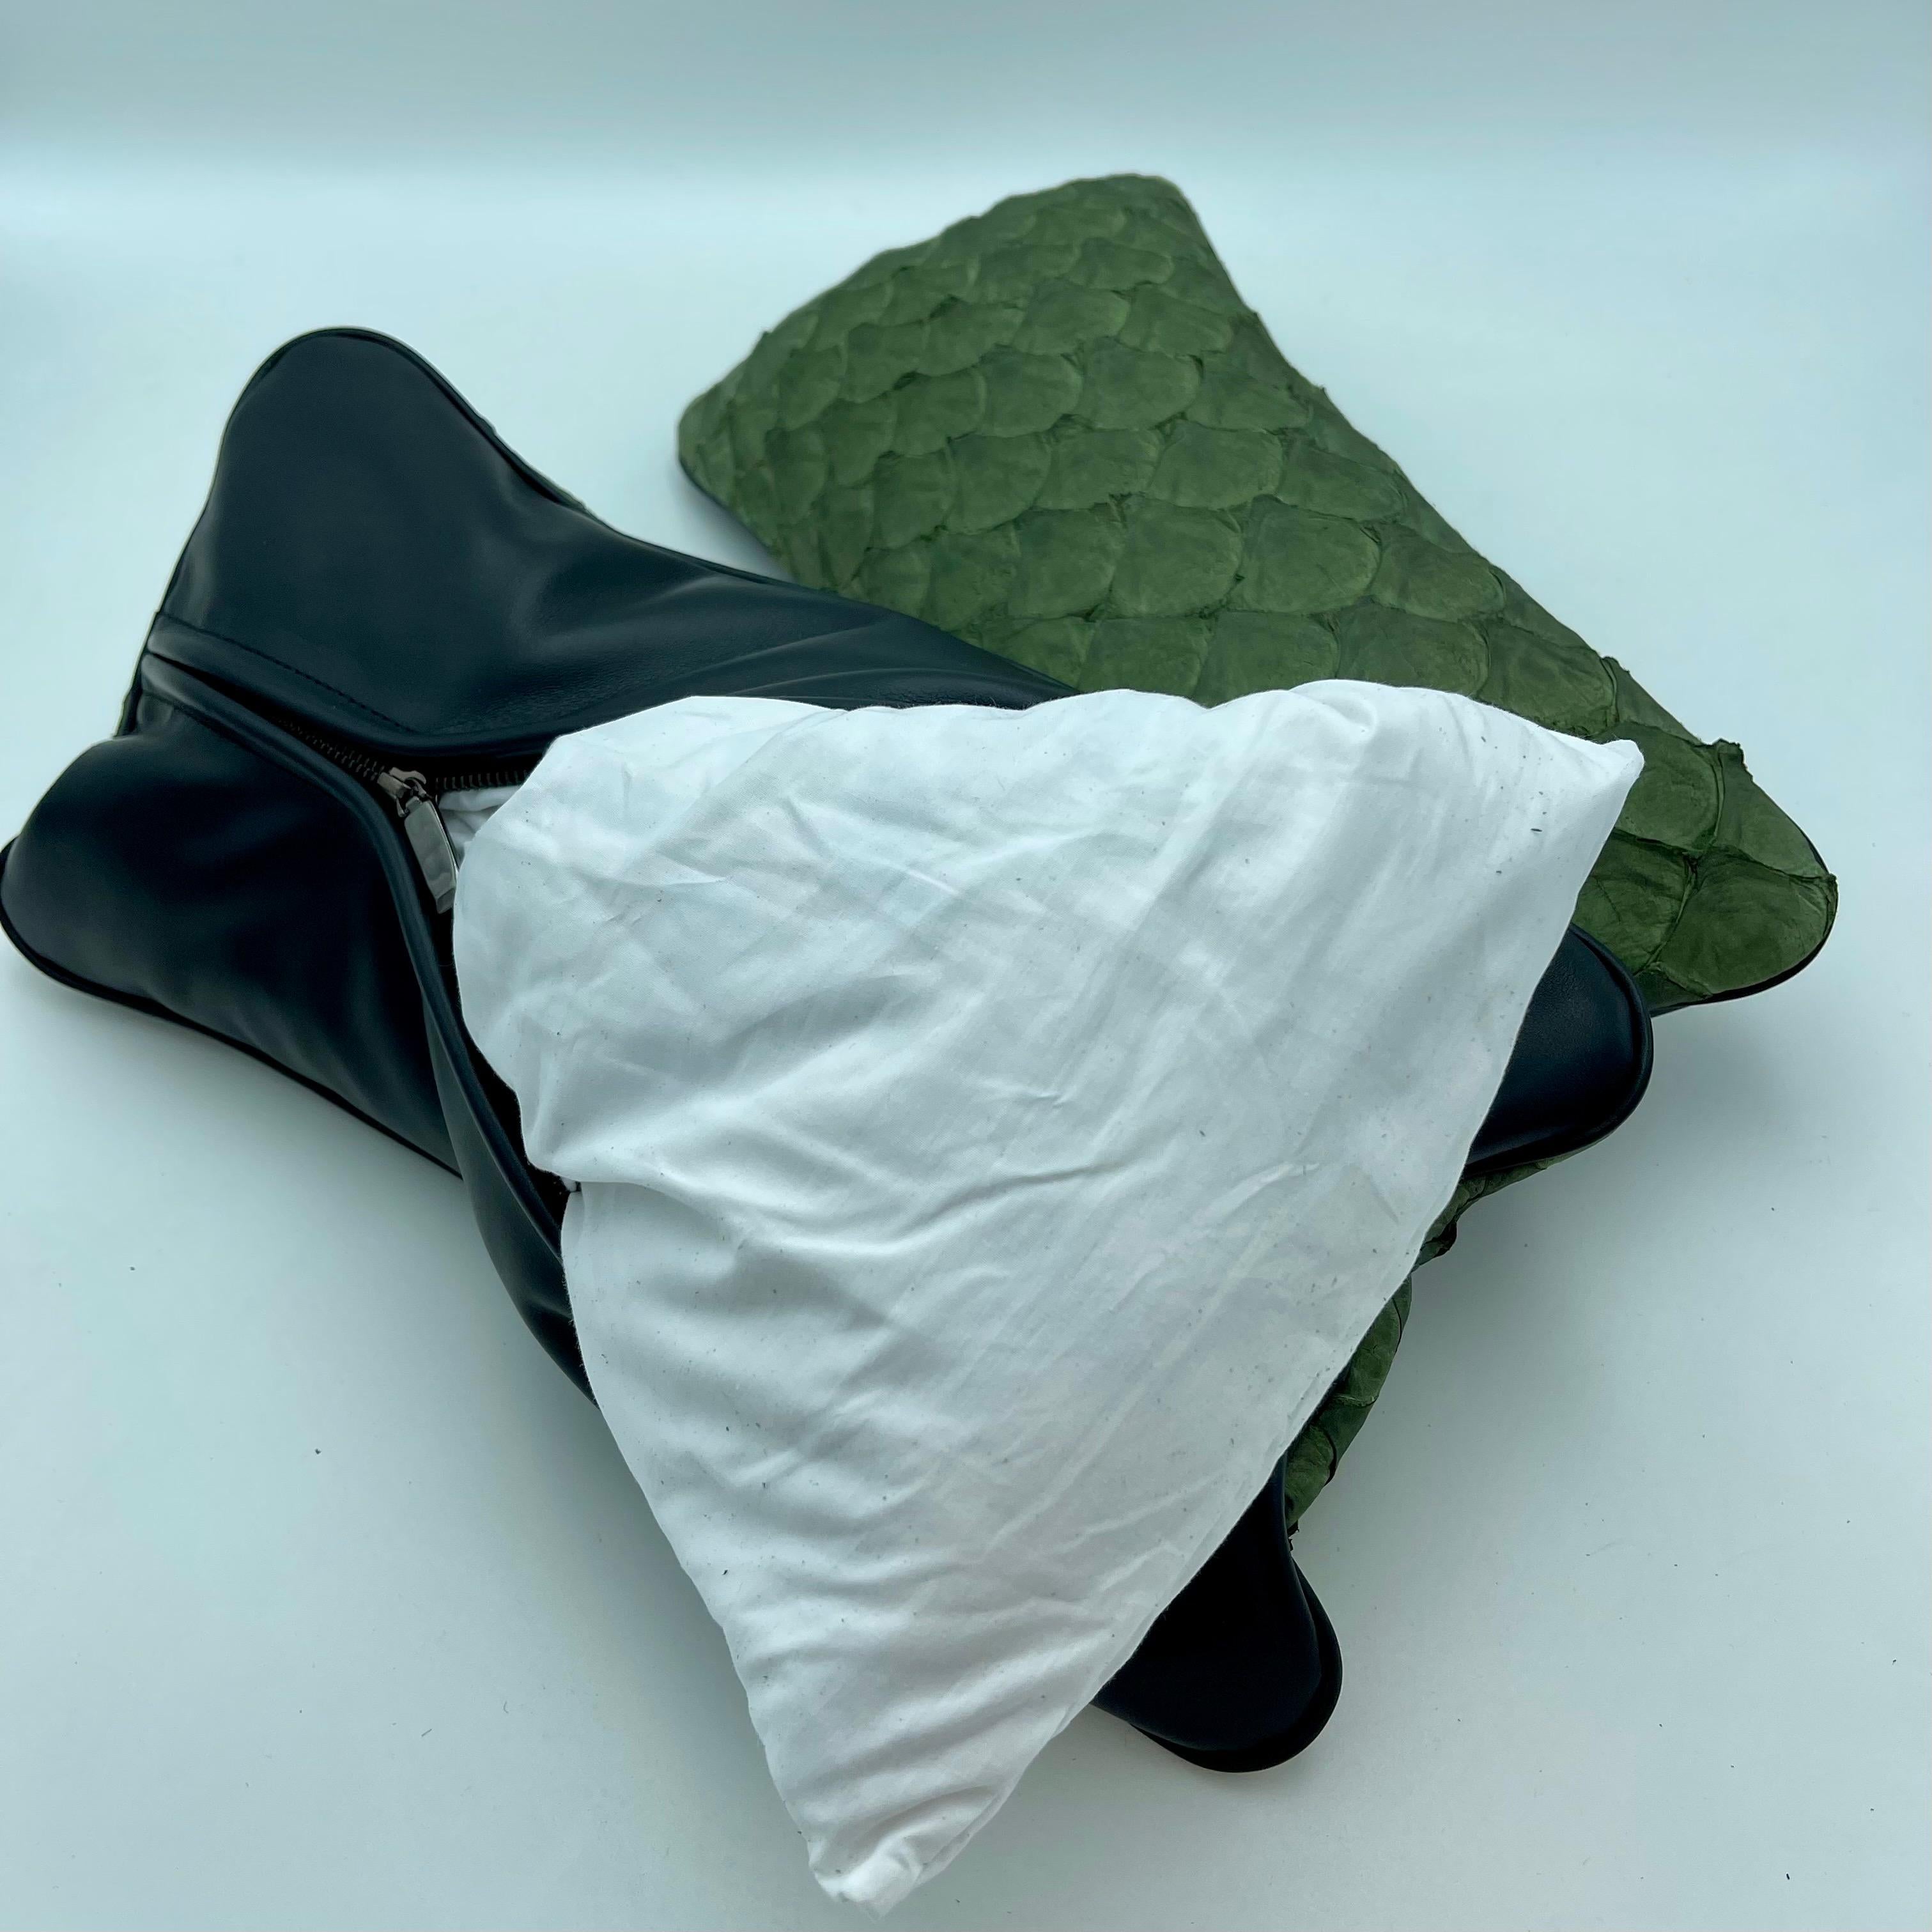 Set of 2 leather cushion, exclusive fish leather black color and black back, small size 15.7 x 7.9 in. Untrimmed scales.

Fish leather luxury cushion. Skins used on these cushions comes from Brazilian food industry, it is the second largest river